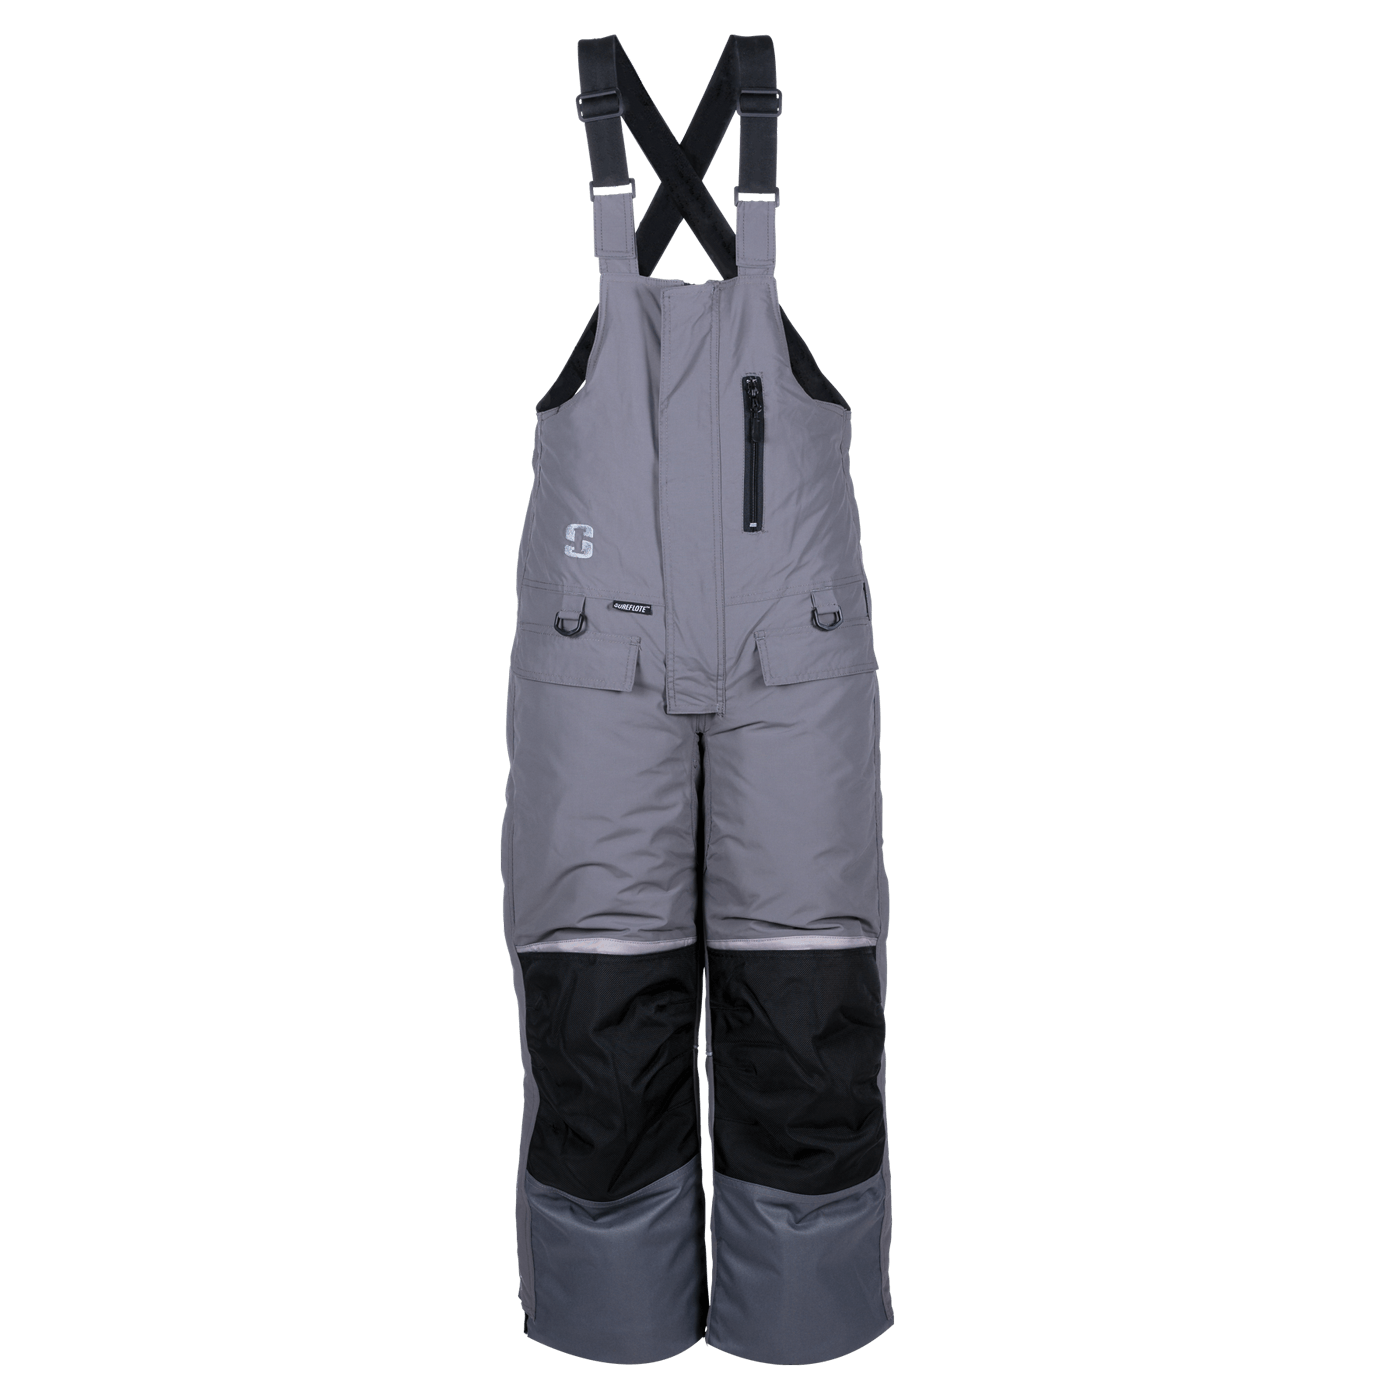 STRIKER ICE Adult Male Hardwater Bibs, Color: Gray/Black, Size: 2XL Tall  (6201009)